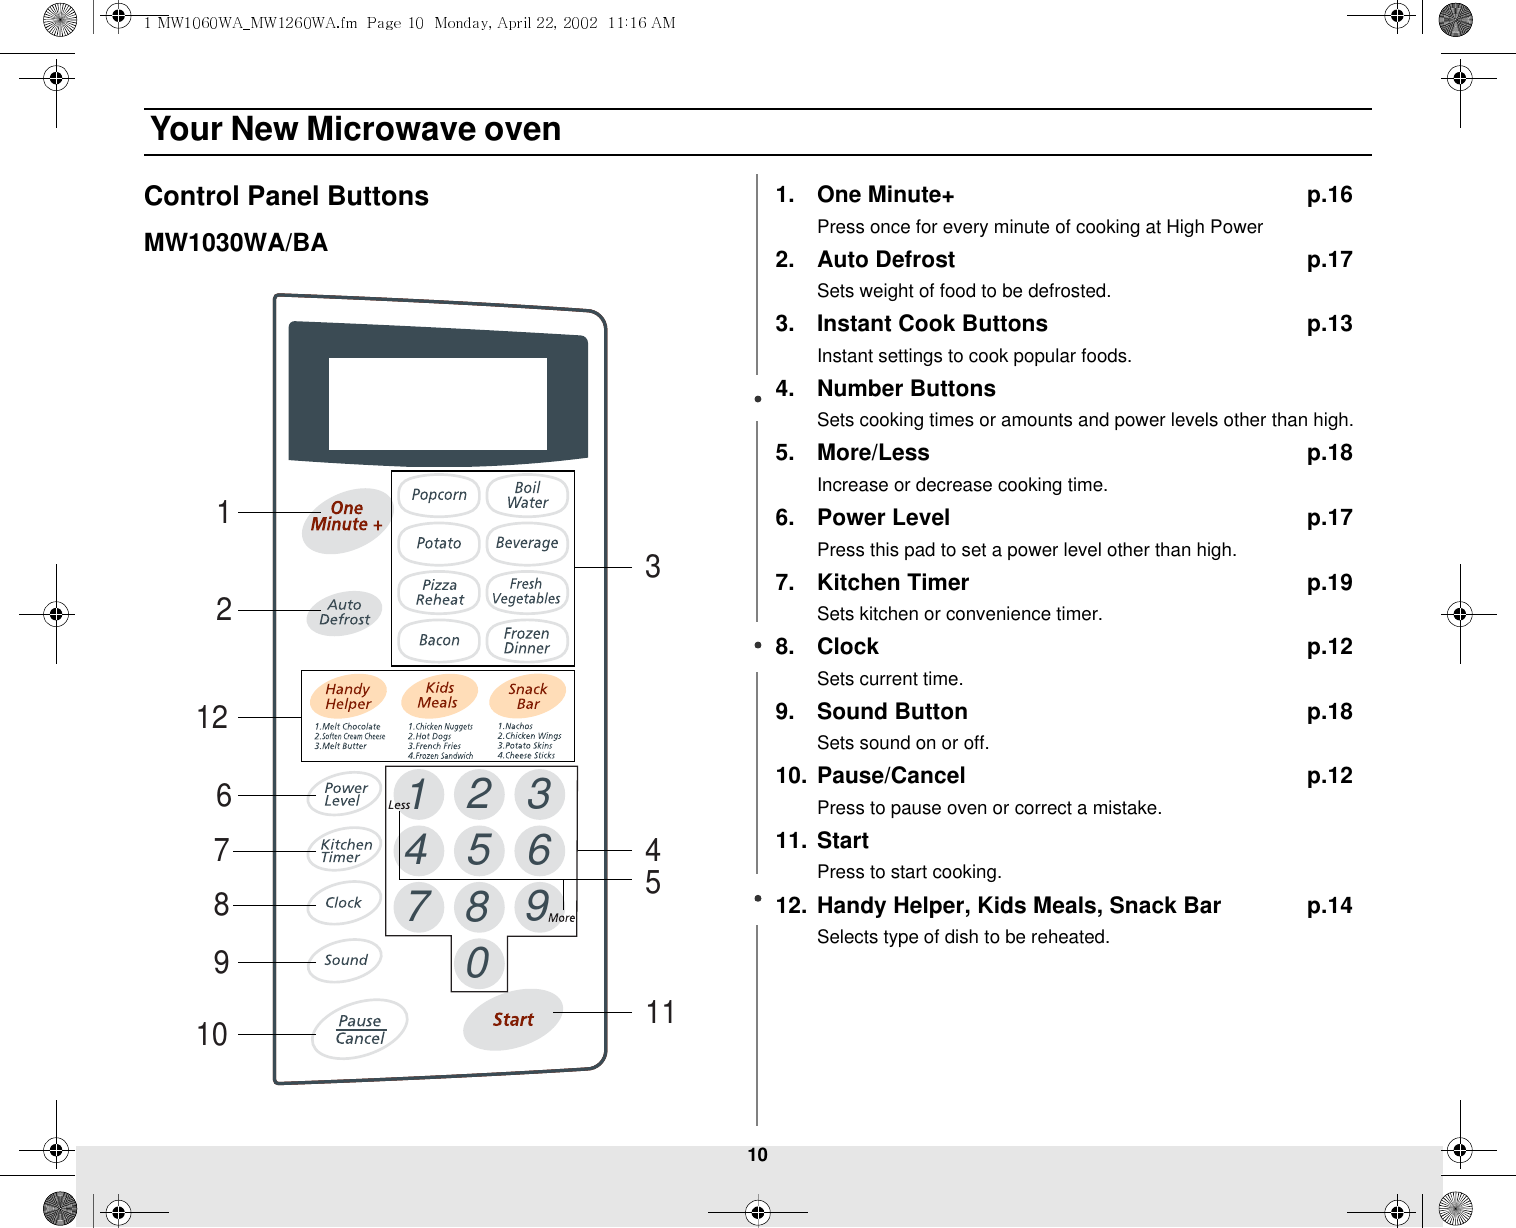 10 Your New Microwave ovenControl Panel ButtonsMW1030WA/BA1. One Minute+ p.16Press once for every minute of cooking at High Power2. Auto Defrost p.17 Sets weight of food to be defrosted.3. Instant Cook Buttons p.13Instant settings to cook popular foods.4. Number ButtonsSets cooking times or amounts and power levels other than high.5. More/Less p.18Increase or decrease cooking time.6. Power Level p.17Press this pad to set a power level other than high.7. Kitchen Timer p.19Sets kitchen or convenience timer.8. Clock p.12Sets current time.9. Sound Button p.18Sets sound on or off.10. Pause/Cancel p.12Press to pause oven or correct a mistake.11. StartPress to start cooking.12. Handy Helper, Kids Meals, Snack Bar p.14Selects type of dish to be reheated.3216549870134511267891012